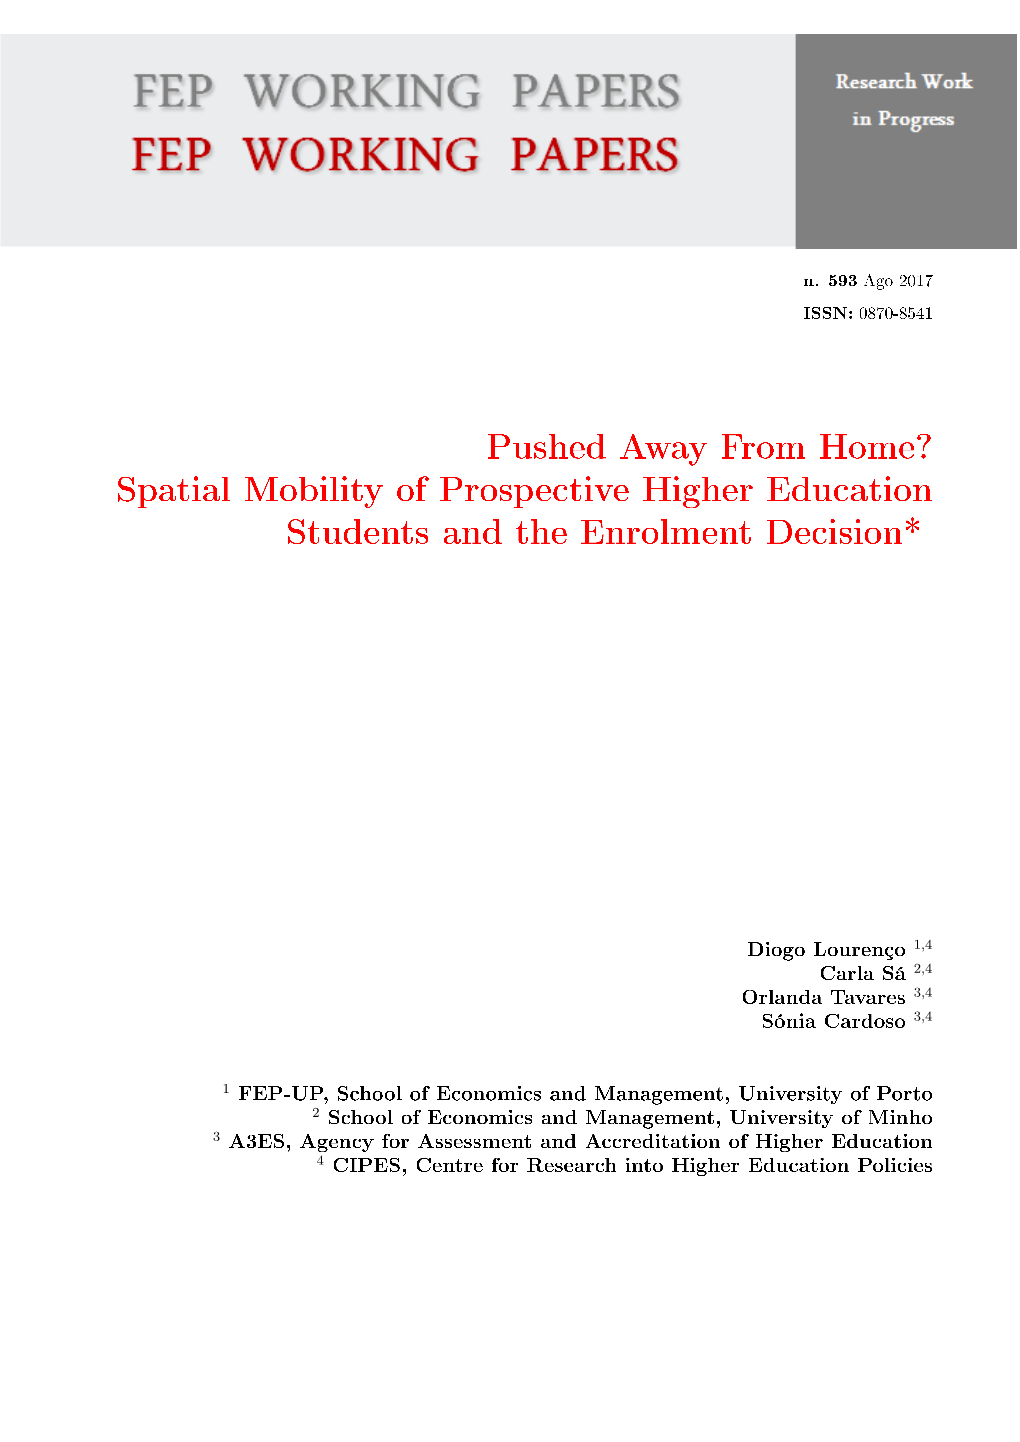 Pushed Away from Home? Spatial Mobility of Prospective Higher Education Students and the Enrolment Decision*